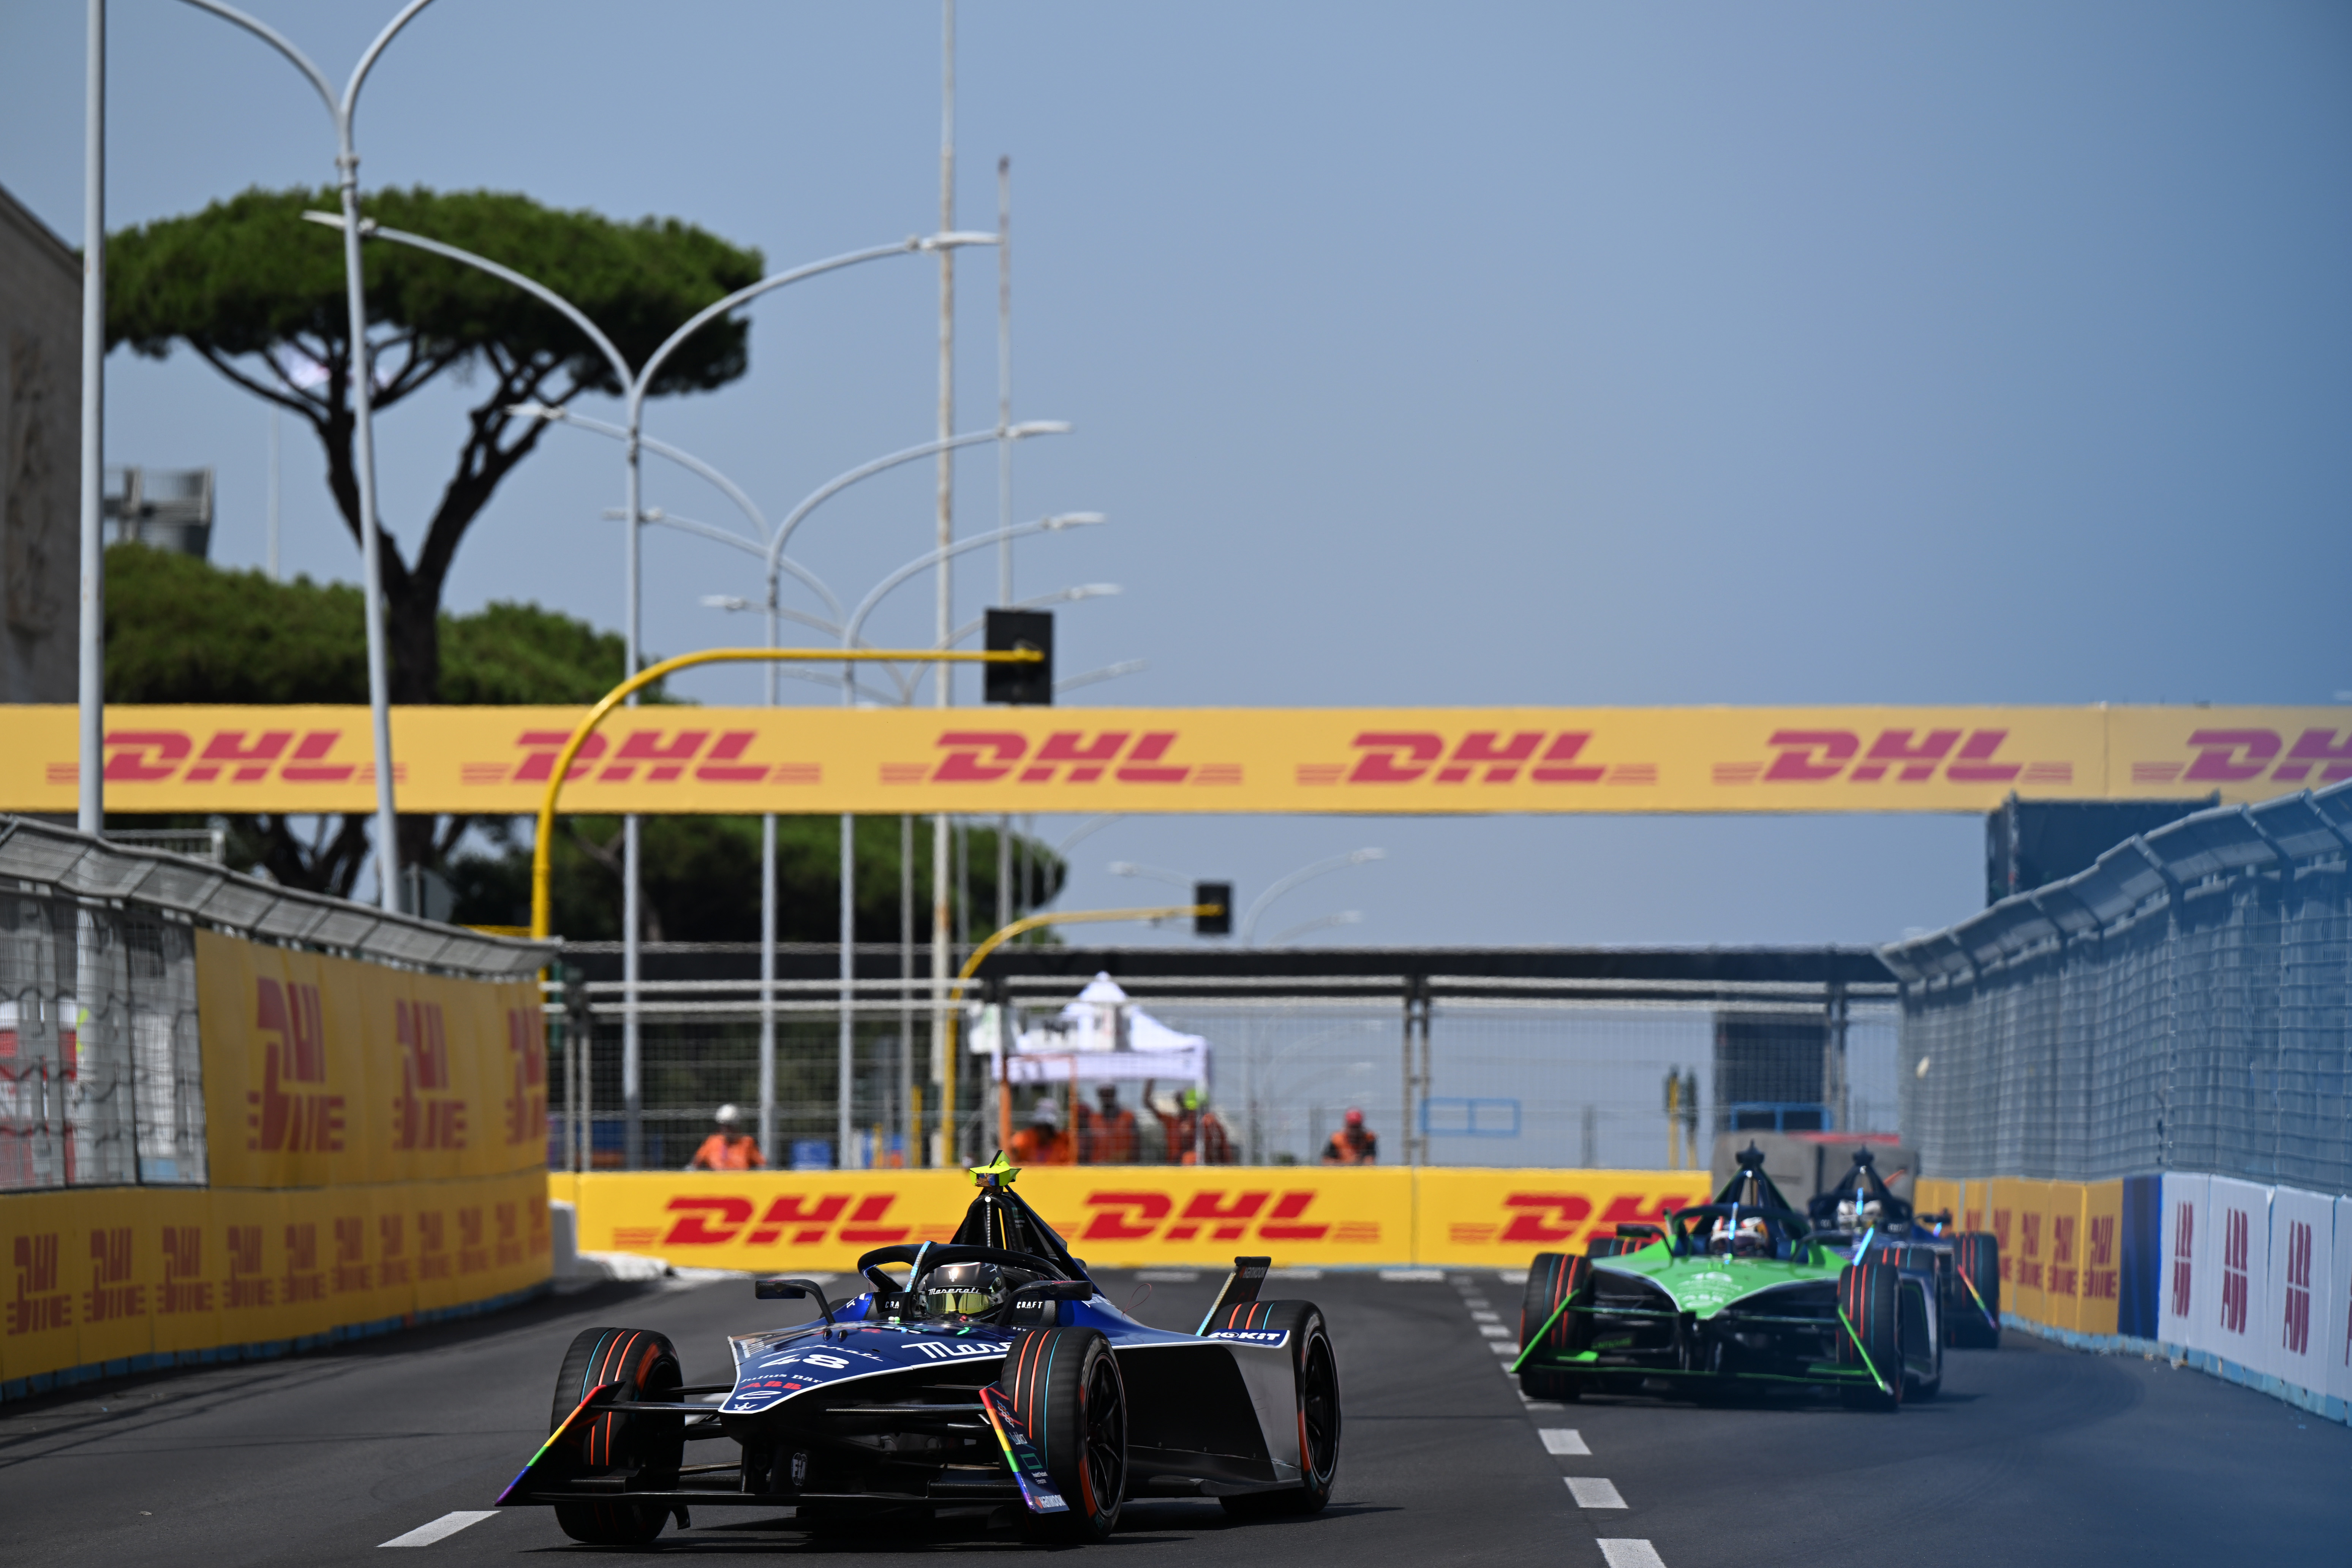 As the logistics partner for Formula E, DHL will utilize its multimodal transport solutions to transport approximately 380 tons of freight